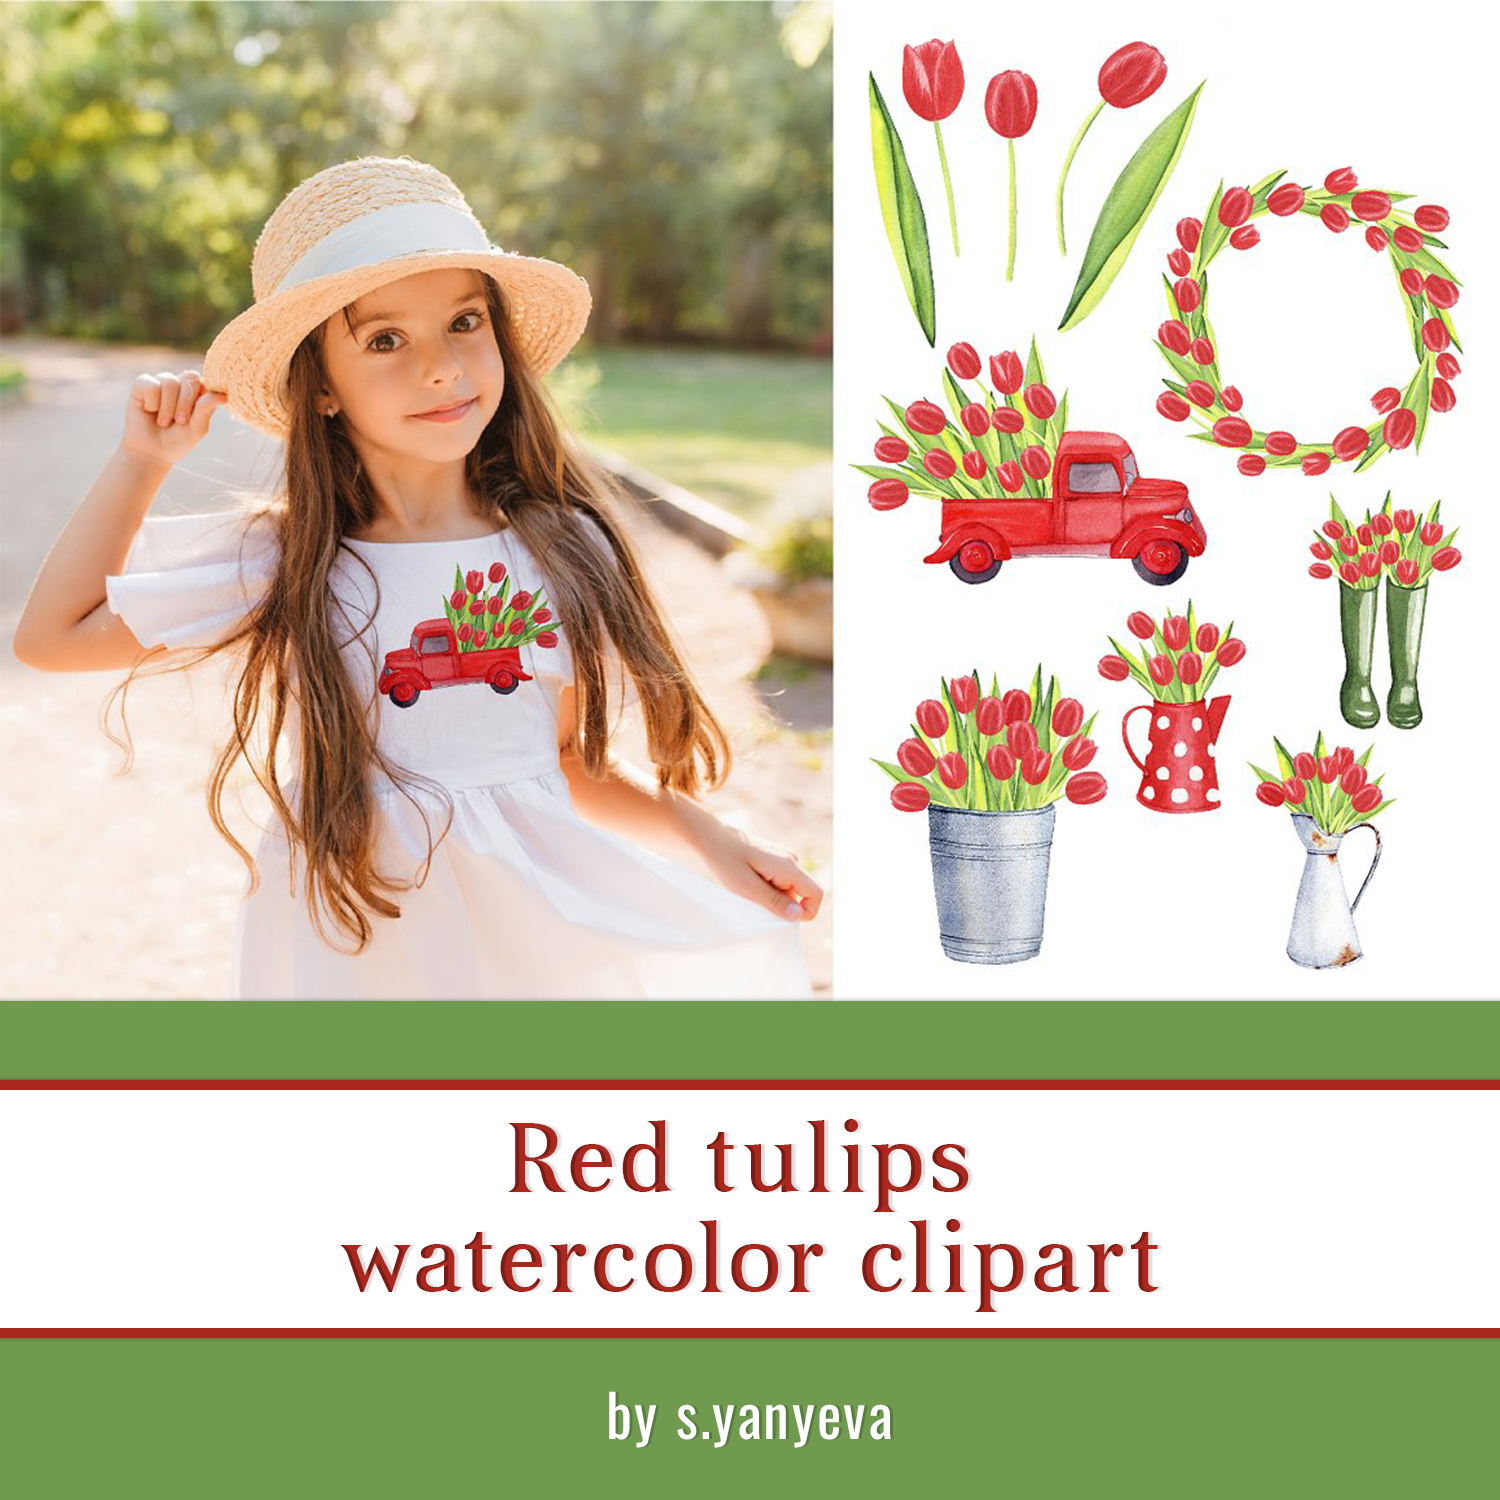 Prints of red tulips watercolor clipart.